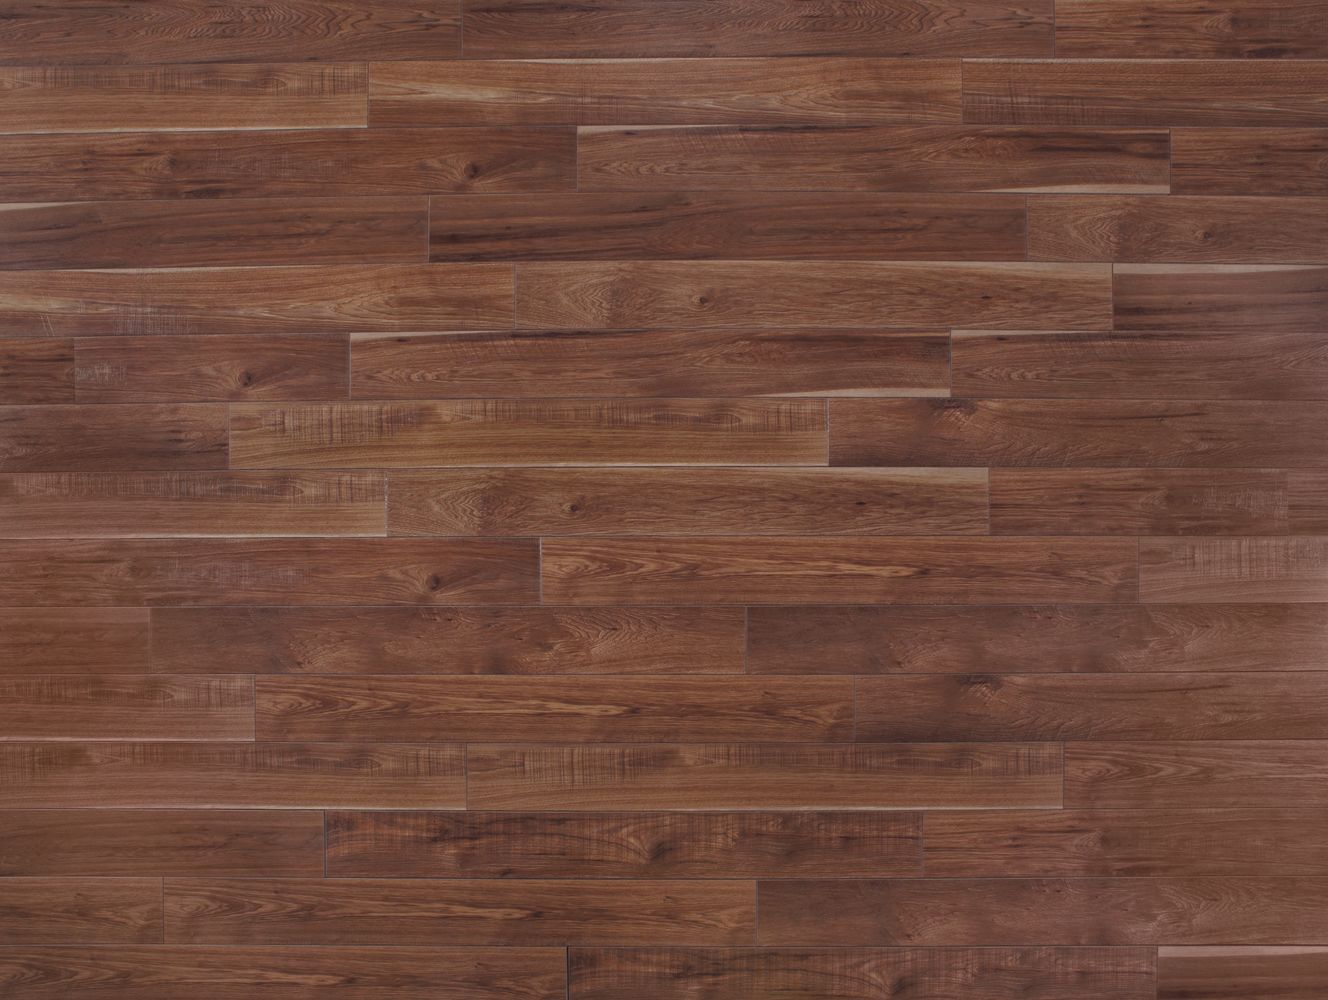 Mannington Restoration Collection® Sawmill Hickory Leather 22332